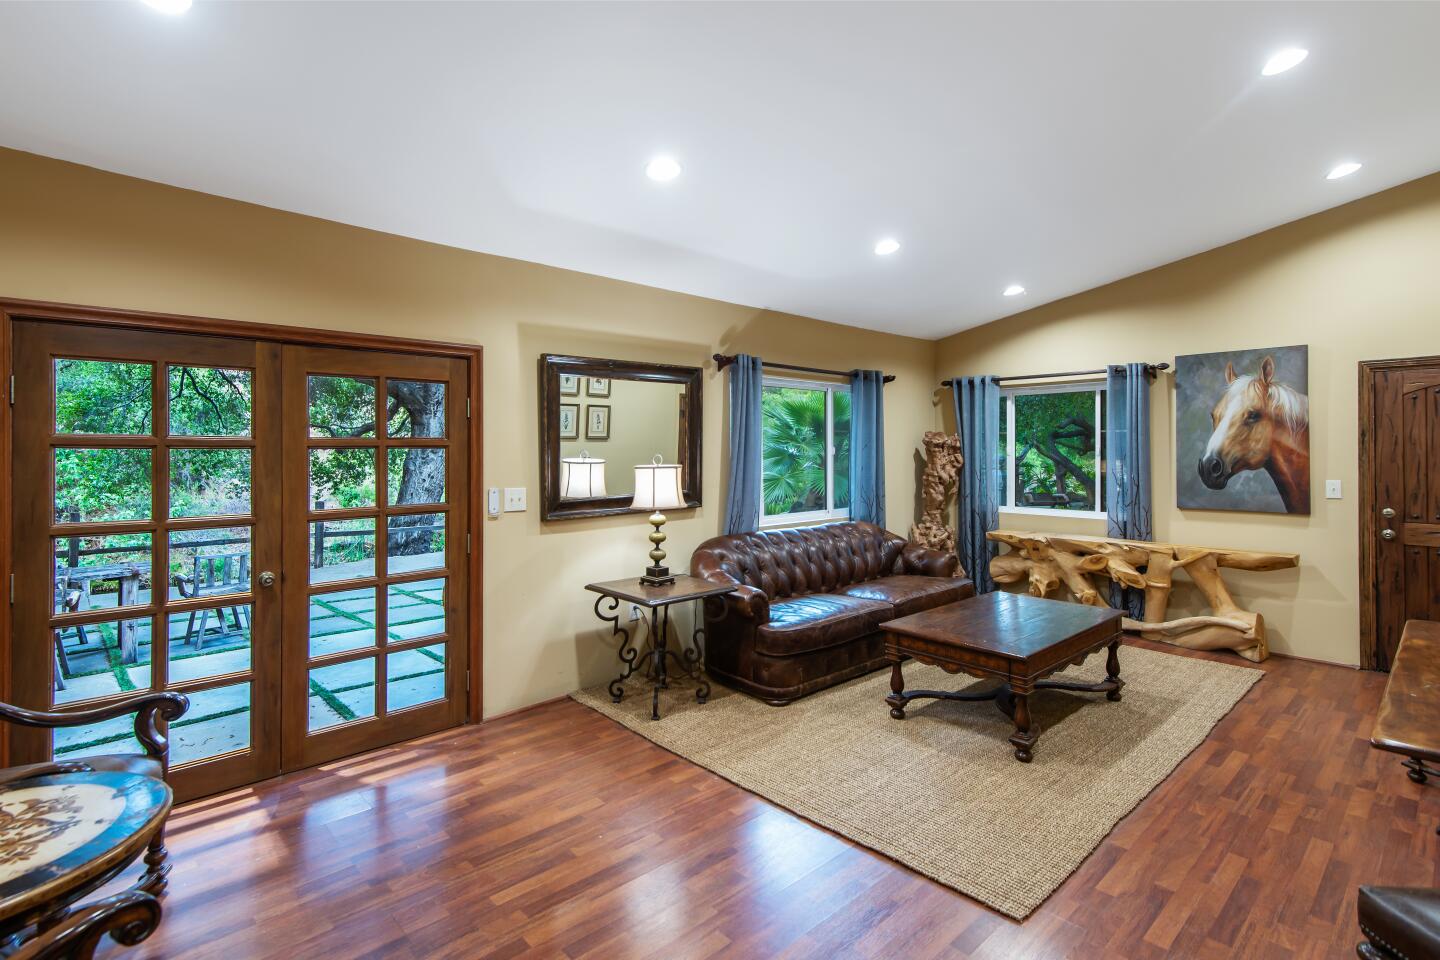 Double wood doors in a living area with wood floors lead onto a deck.